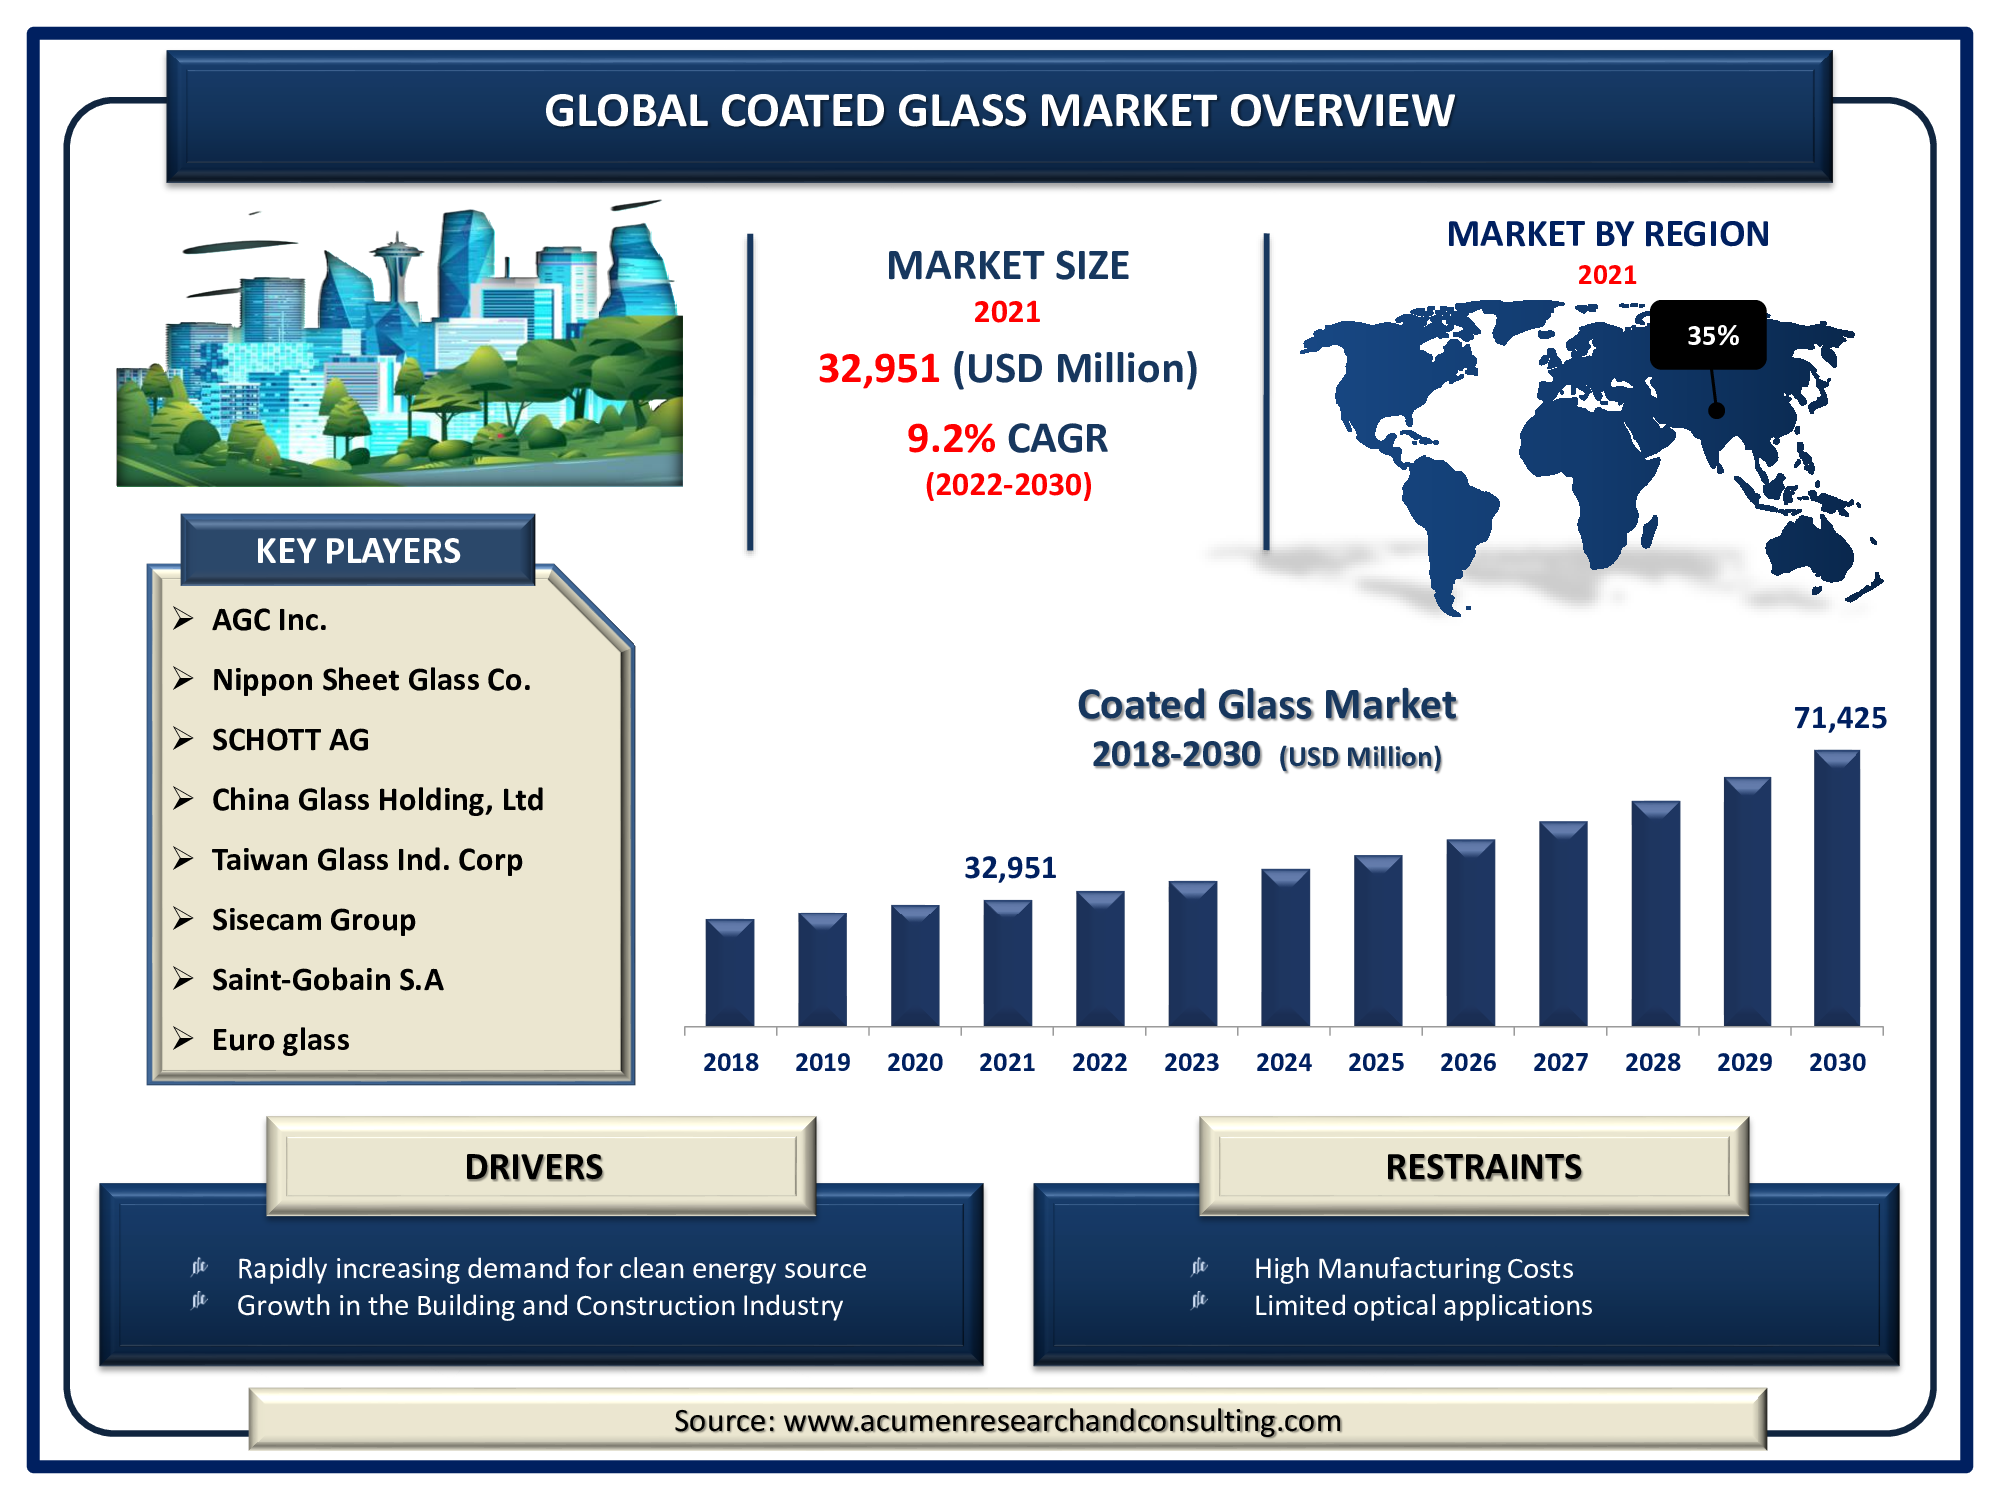 Coated Glass Market Size accounted for USD 32,951 Million in 2021 and is expected to reach USD 71,425 Million by 2030 growing at a CAGR of 9.2% during the forecast period from 2022 to 2030.